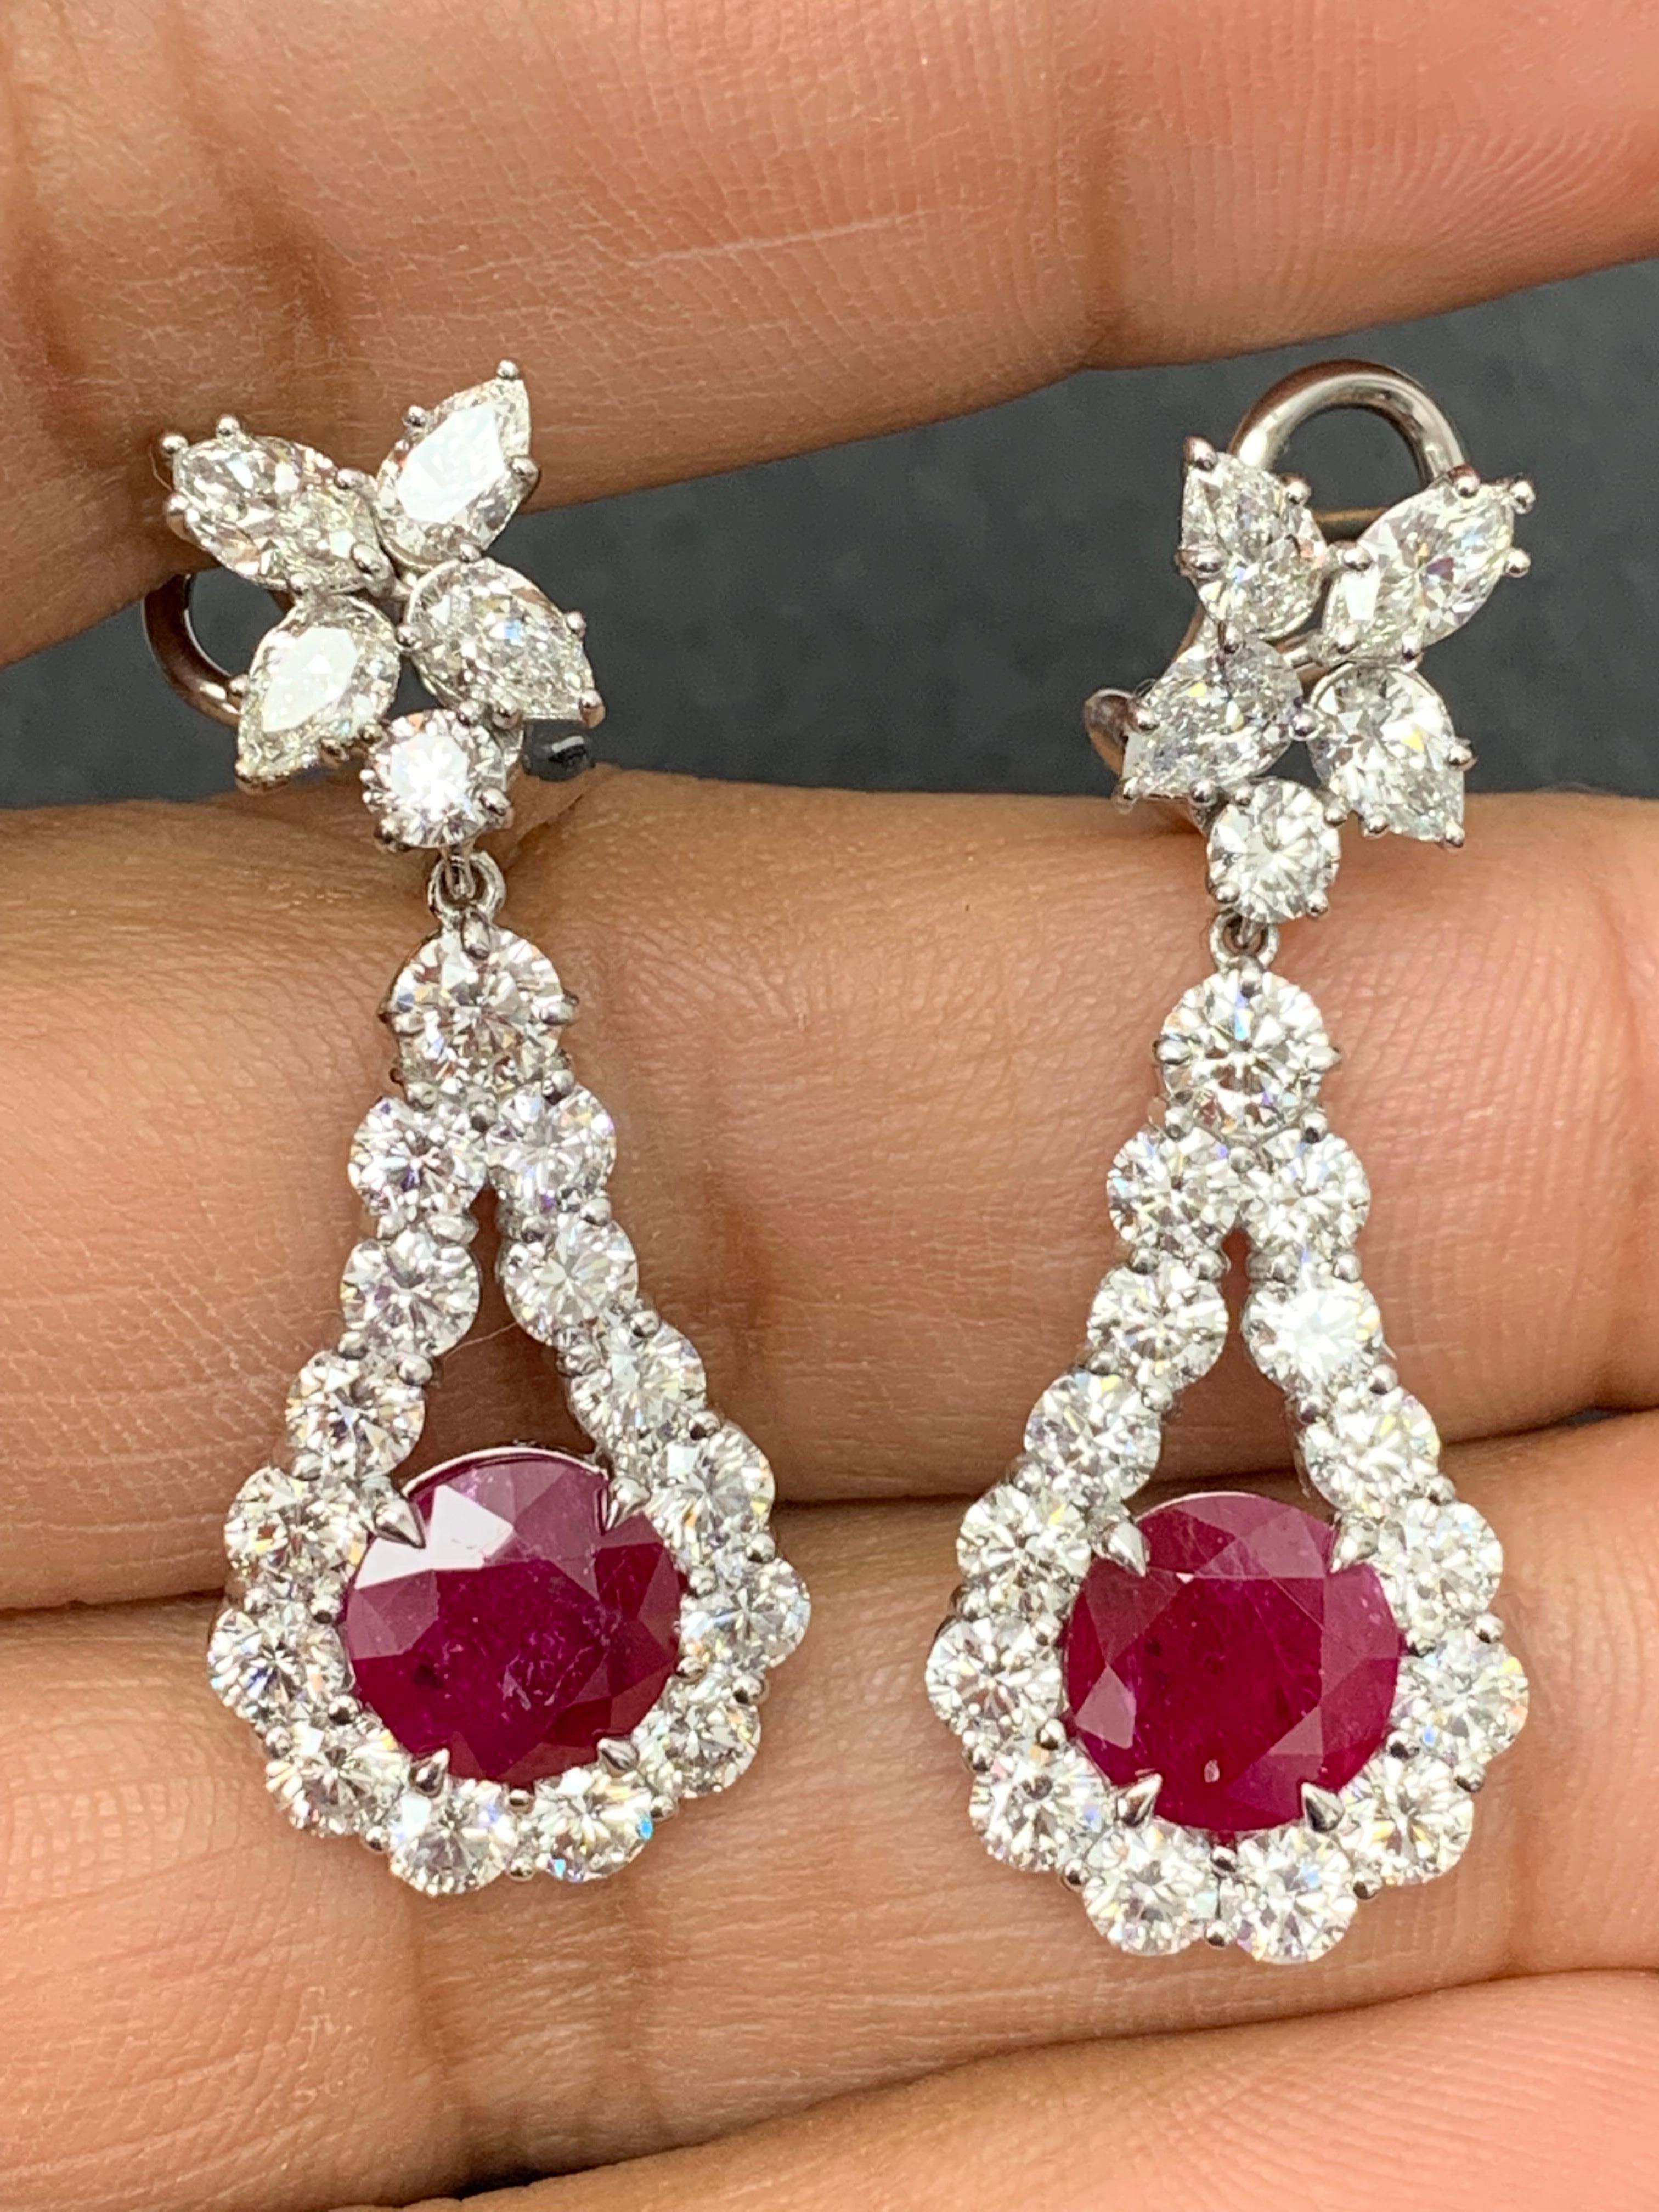 4.20 Carat Round Cut Ruby  and Diamond Drop Earrings in 18K White Gold For Sale 2